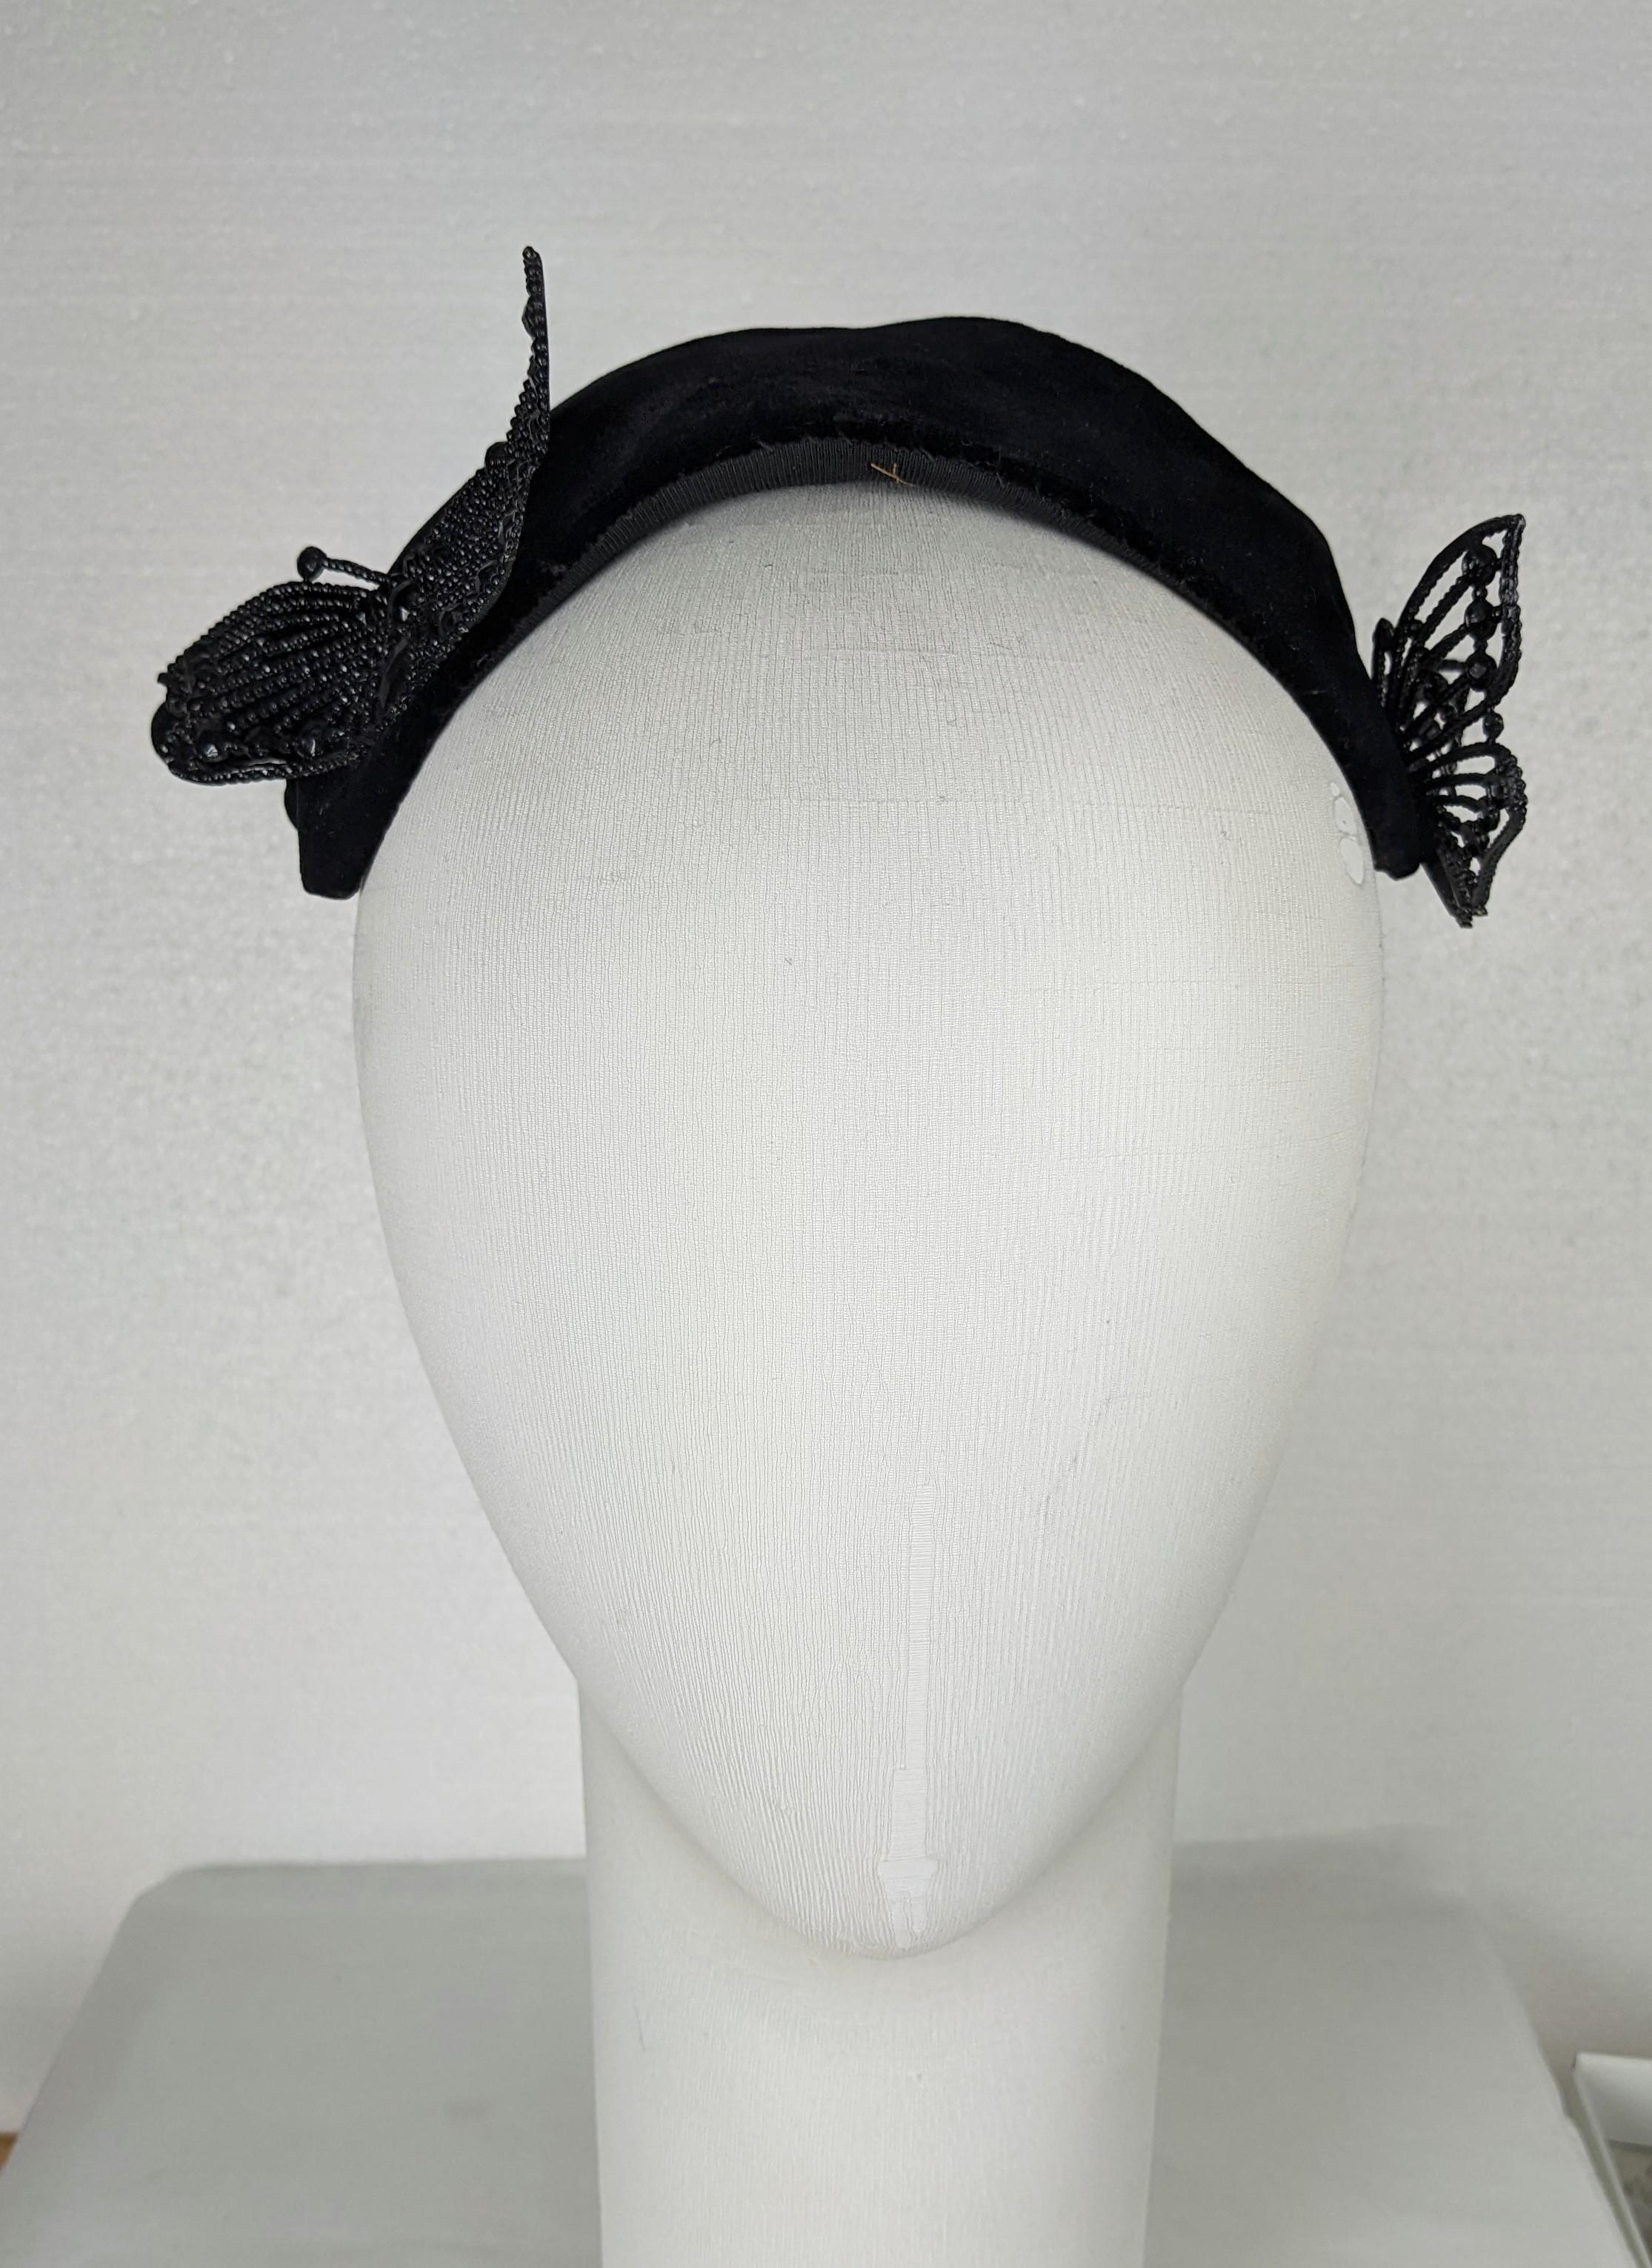 Rare Fantasy Collectible Bes Ben Surreal Mask Hat from the 1940's. The Mad Hatter of Chicago created some of the craziest novelty designs of the period. Black velvet mask shaped hat with Victorian style blacked cut steel butterfly decorations.